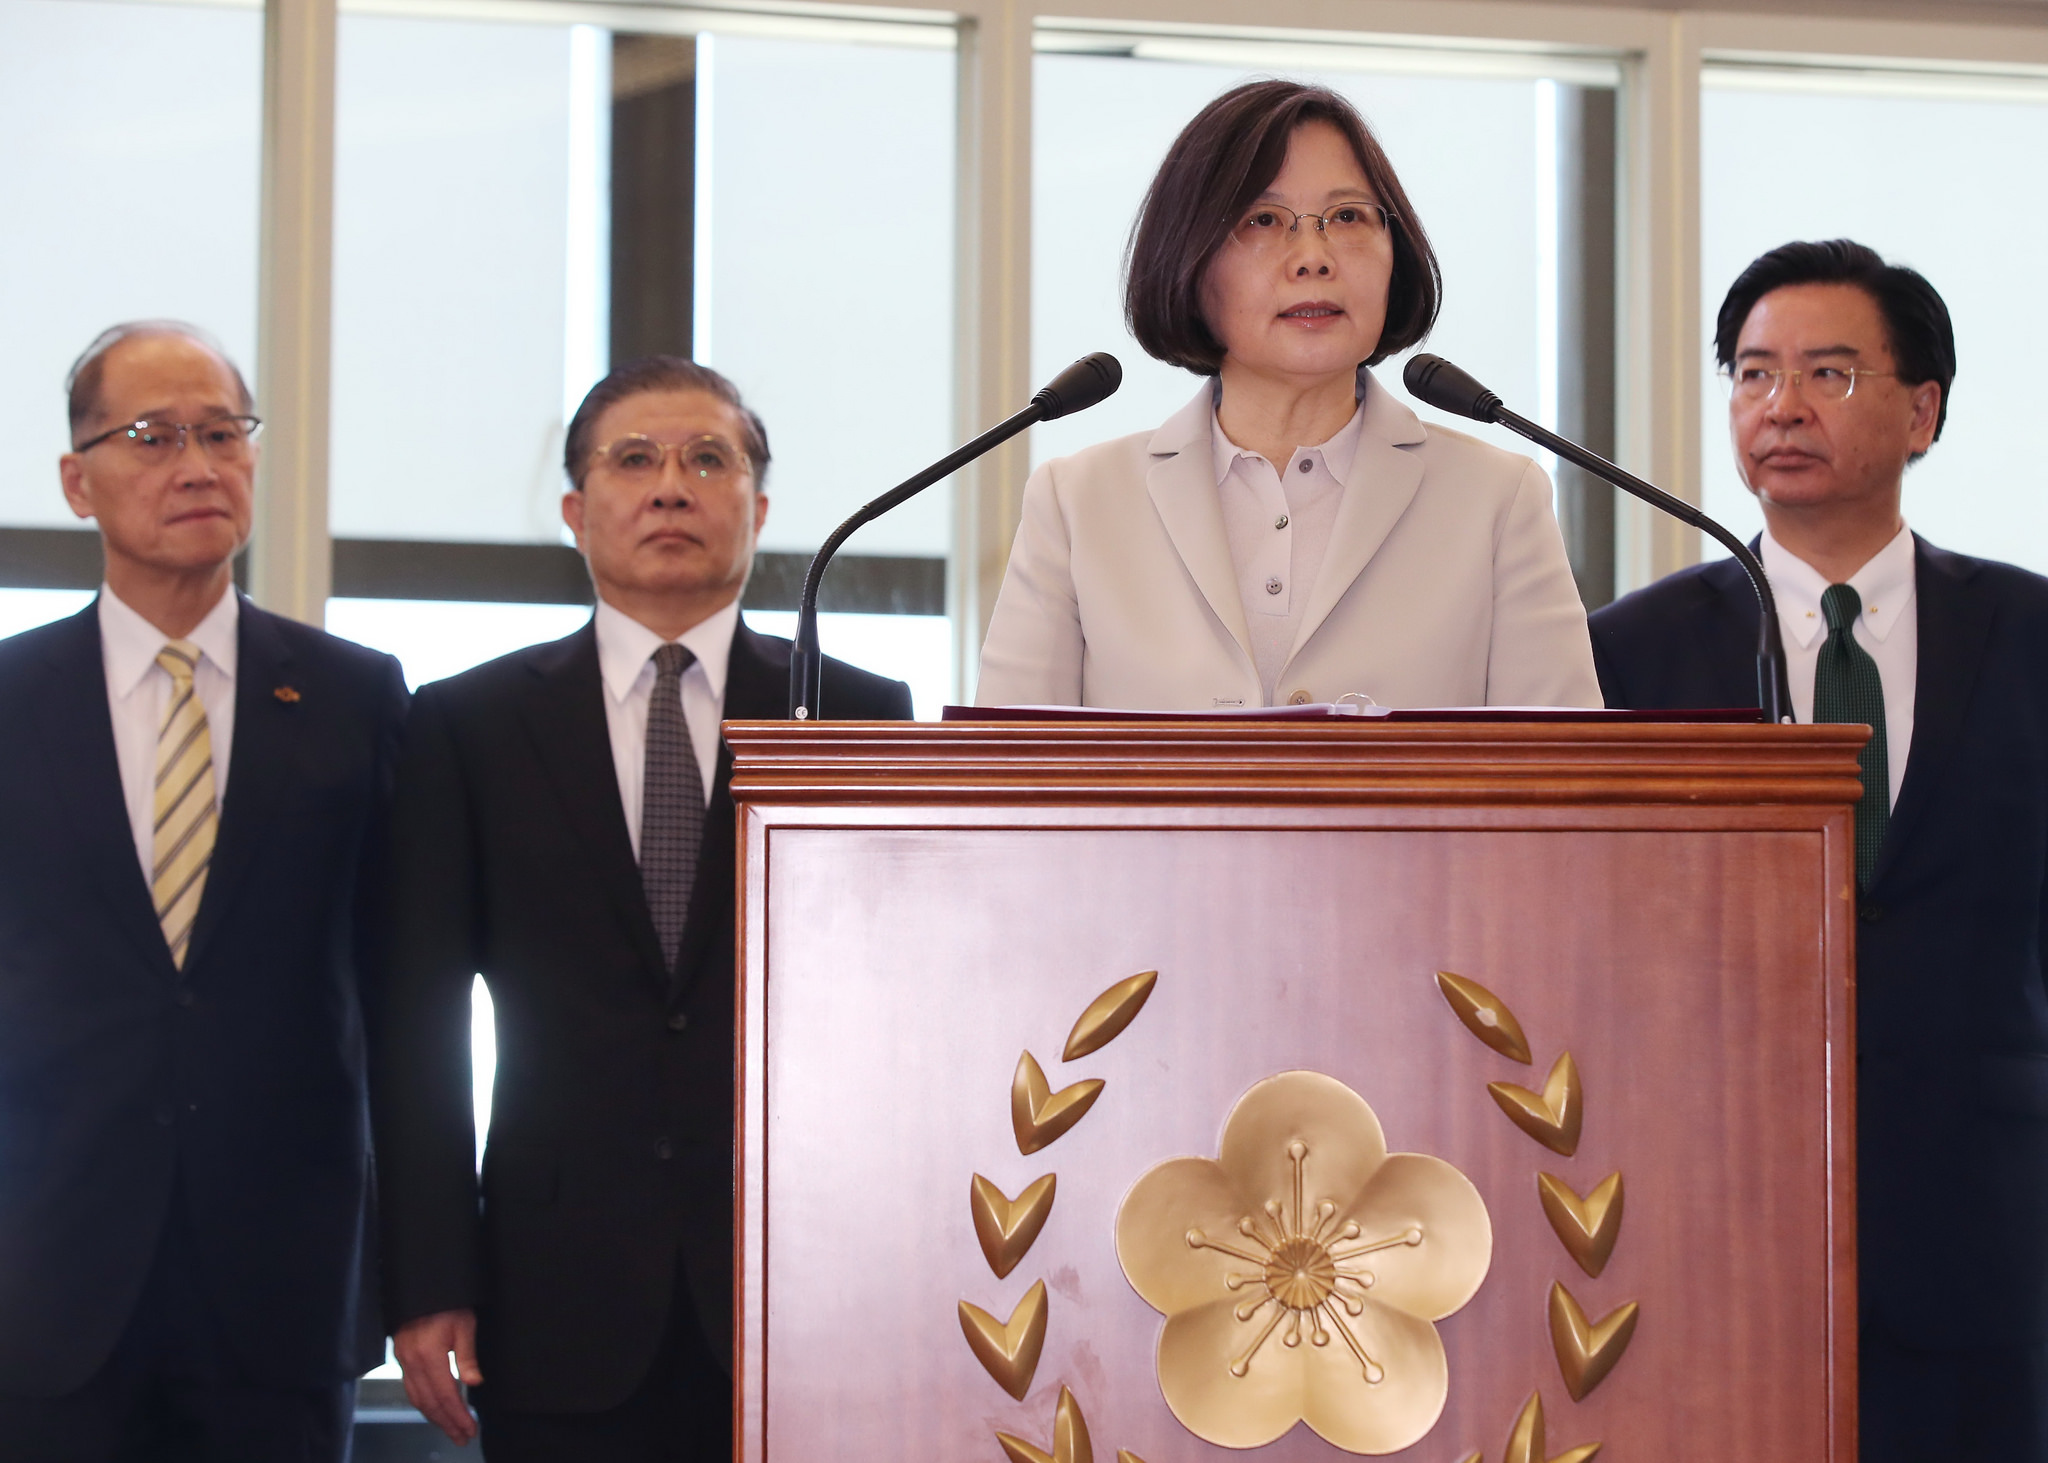 President Tsai departs on journey to diplomatic allies Panama and Paraguay